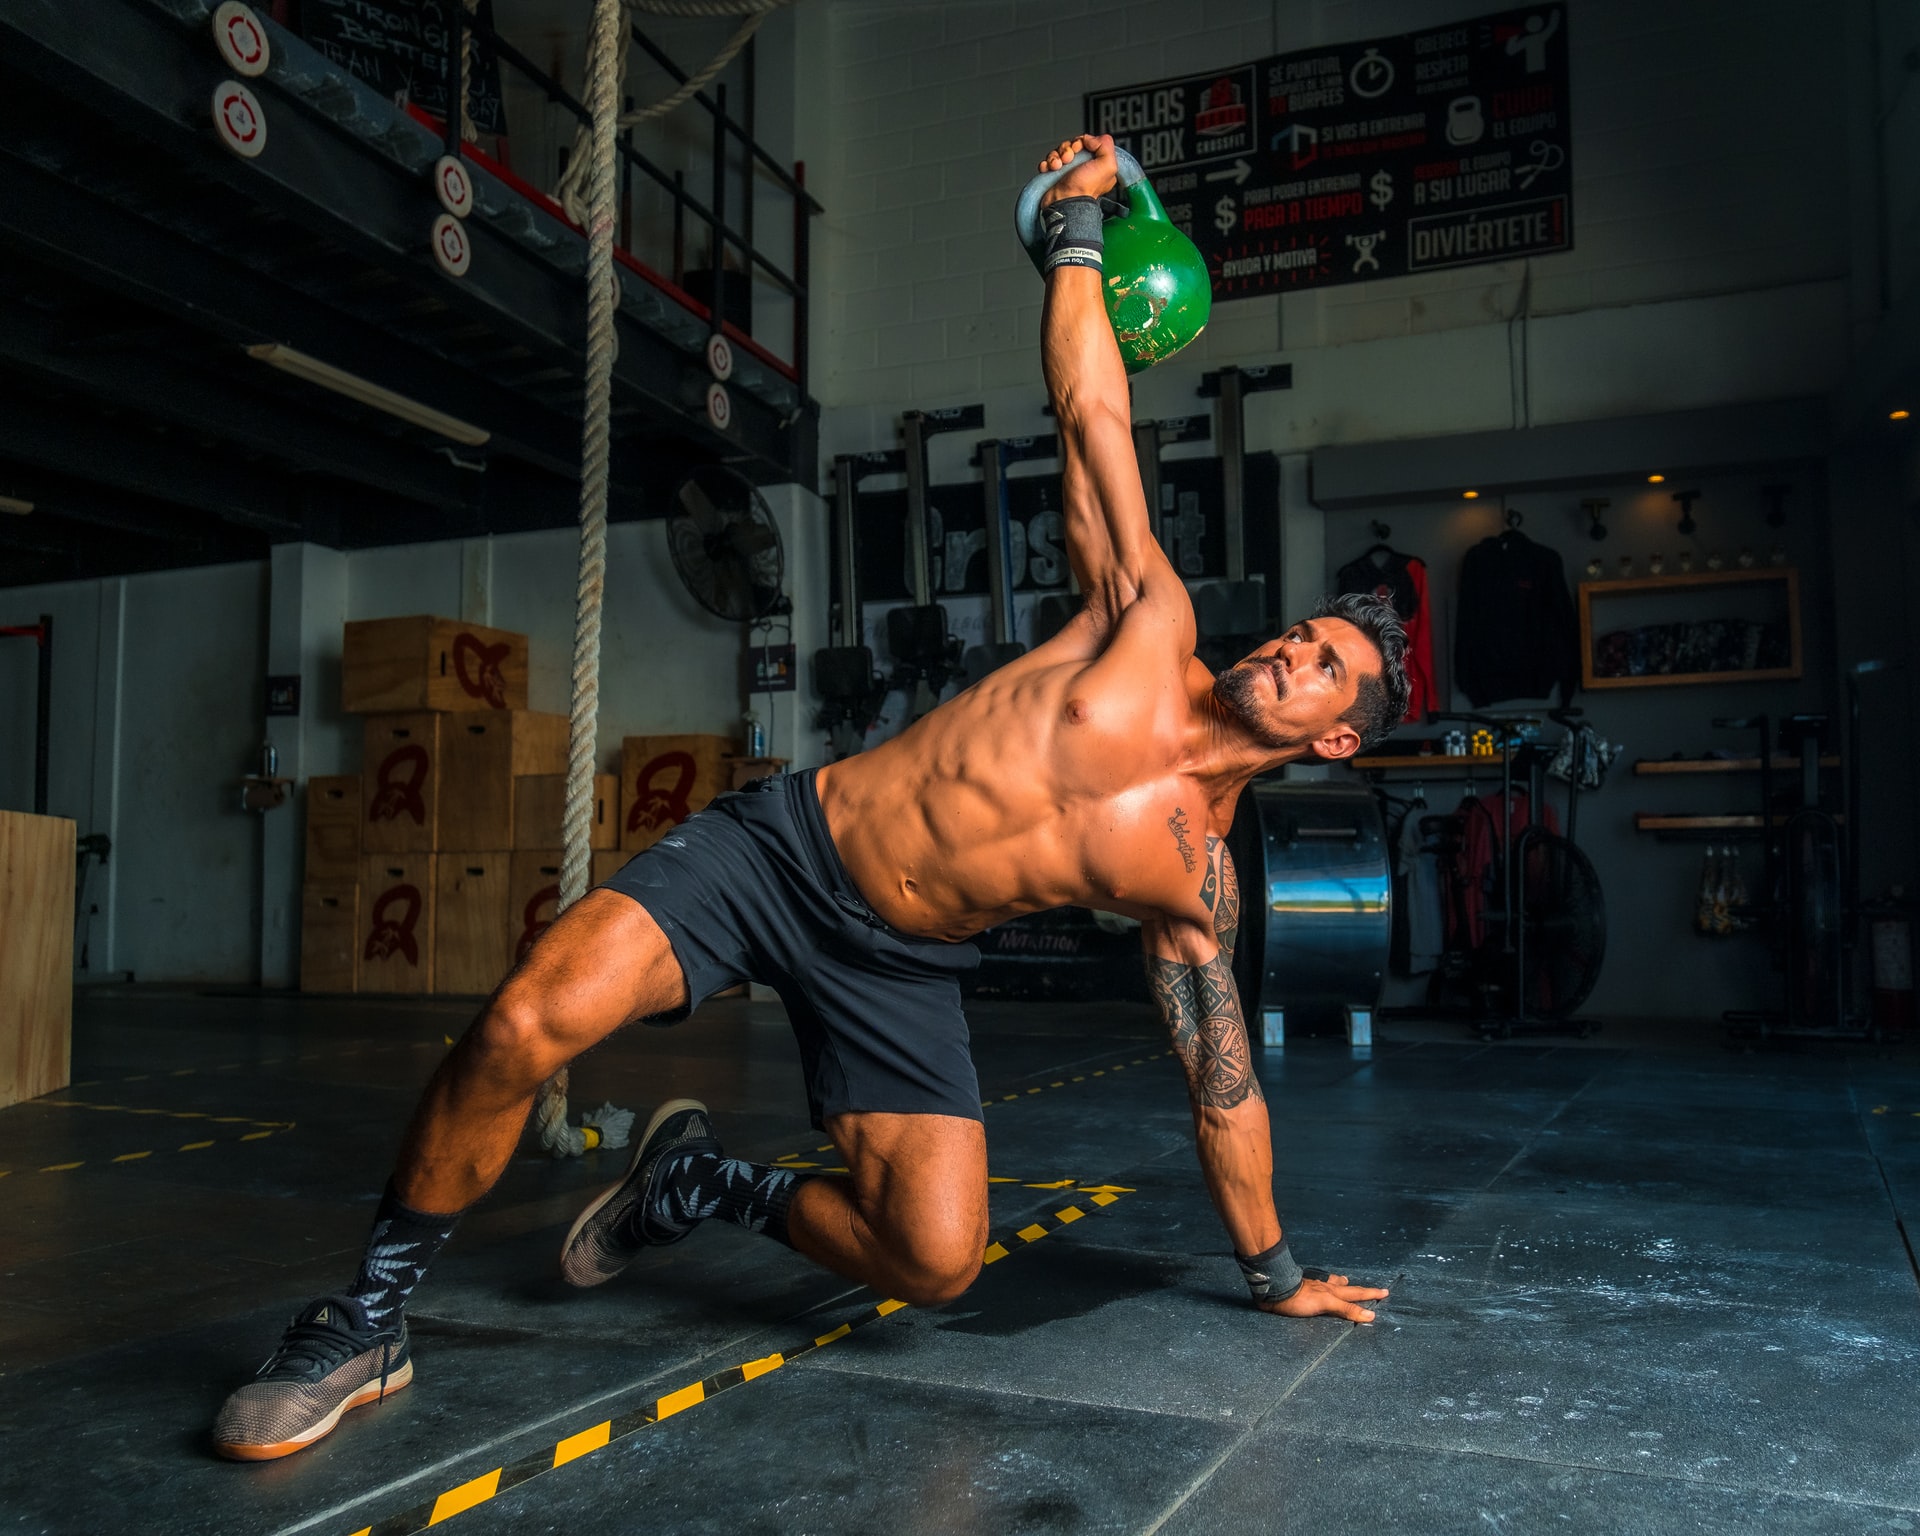 Workout Routines for the More Experienced Body Builders